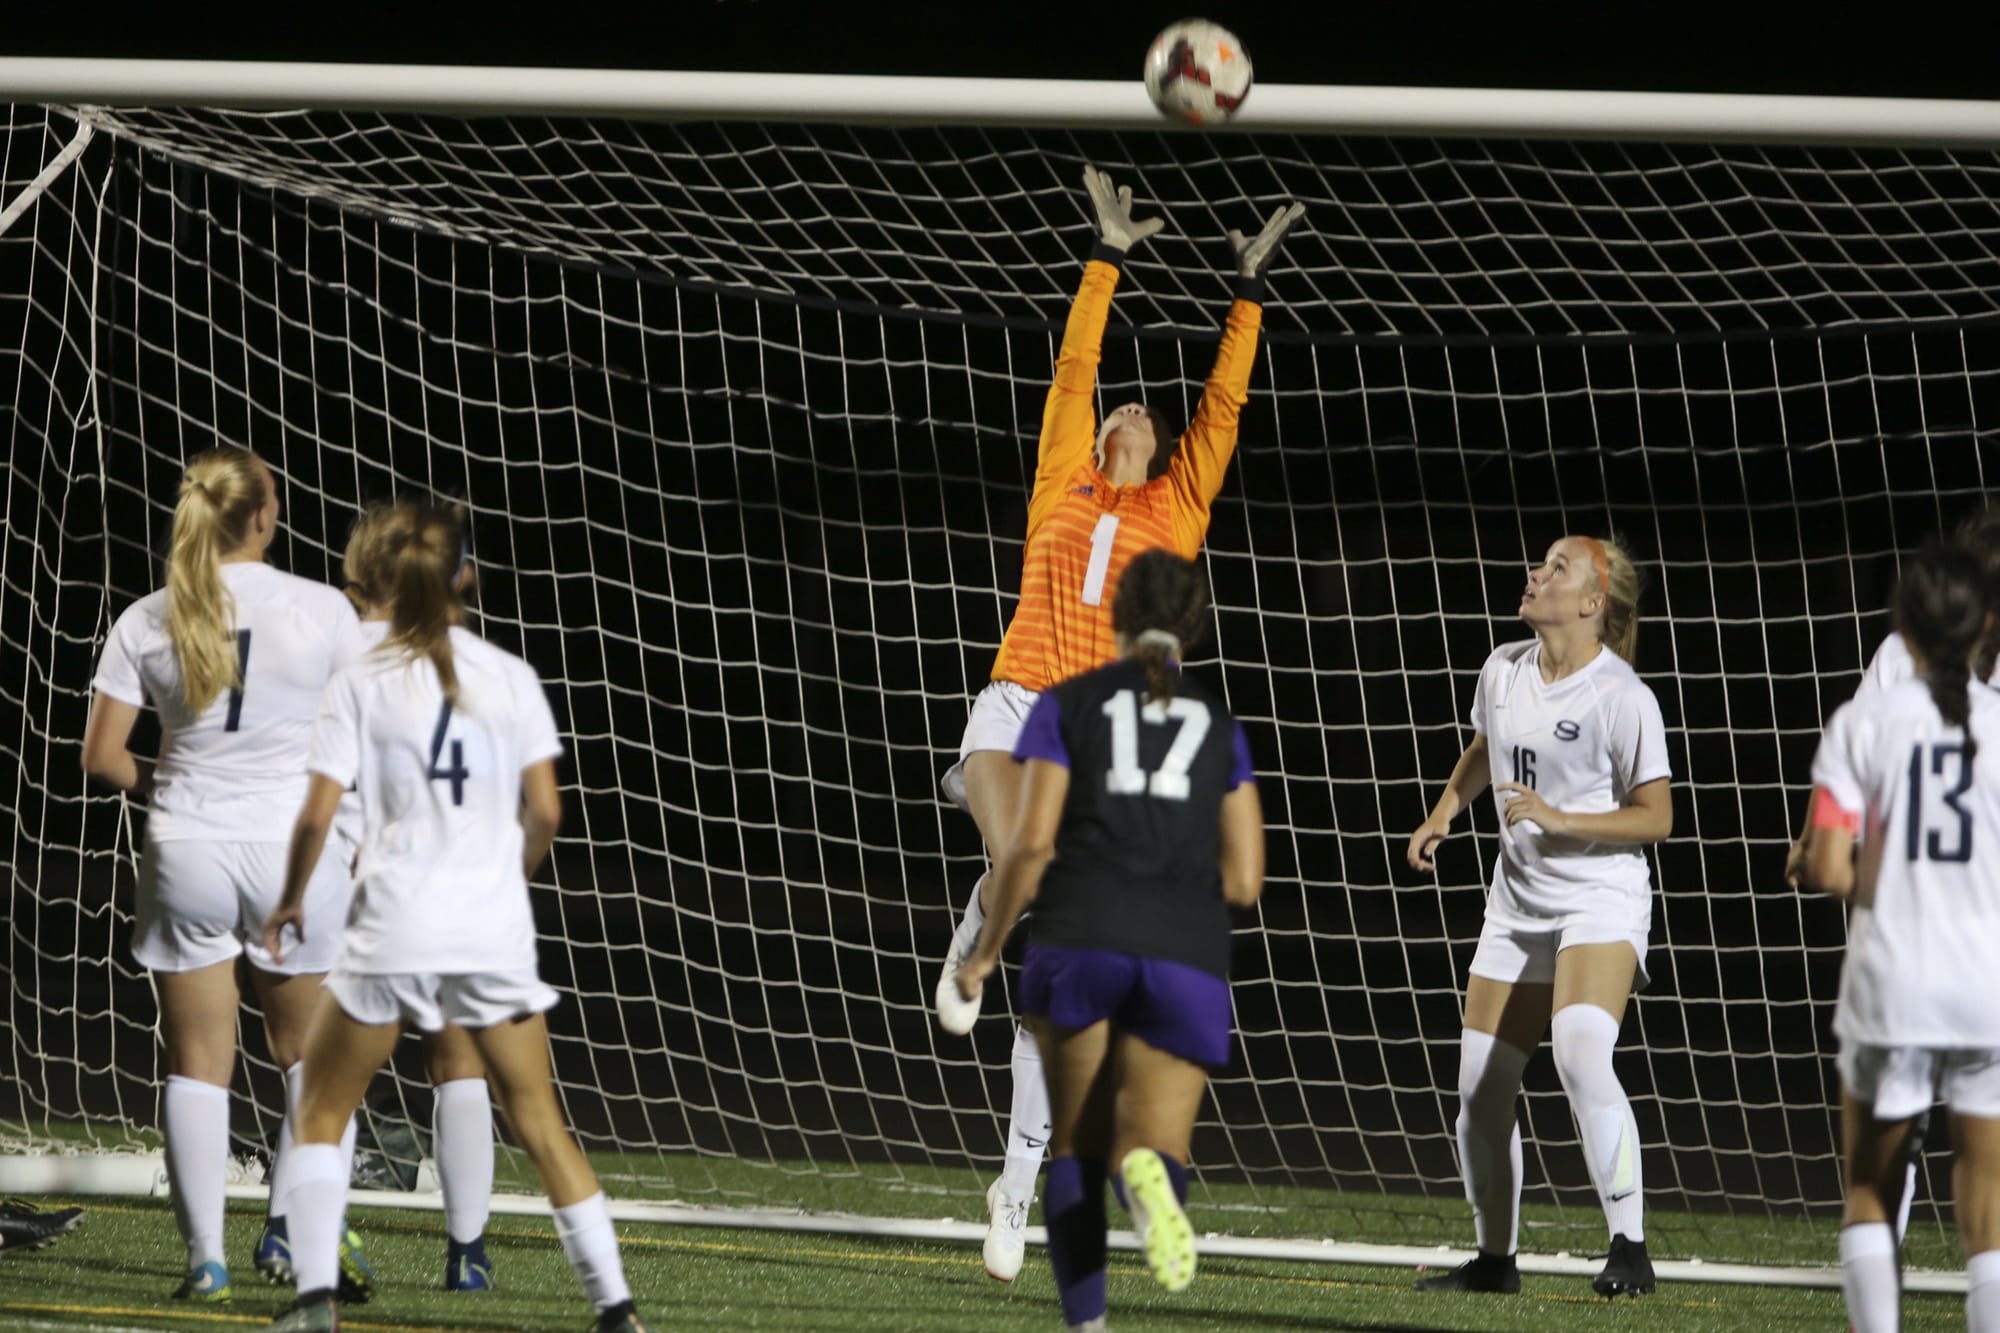 Skyview's goalkeeper Allie Thompson (1) successfully defends again a shot. Skyview beat Columbia River High School, 1-0, in the the season opener of girls soccer on Sept. 4, 2018 at Columbia River High School in Vancouver. (Randy L.